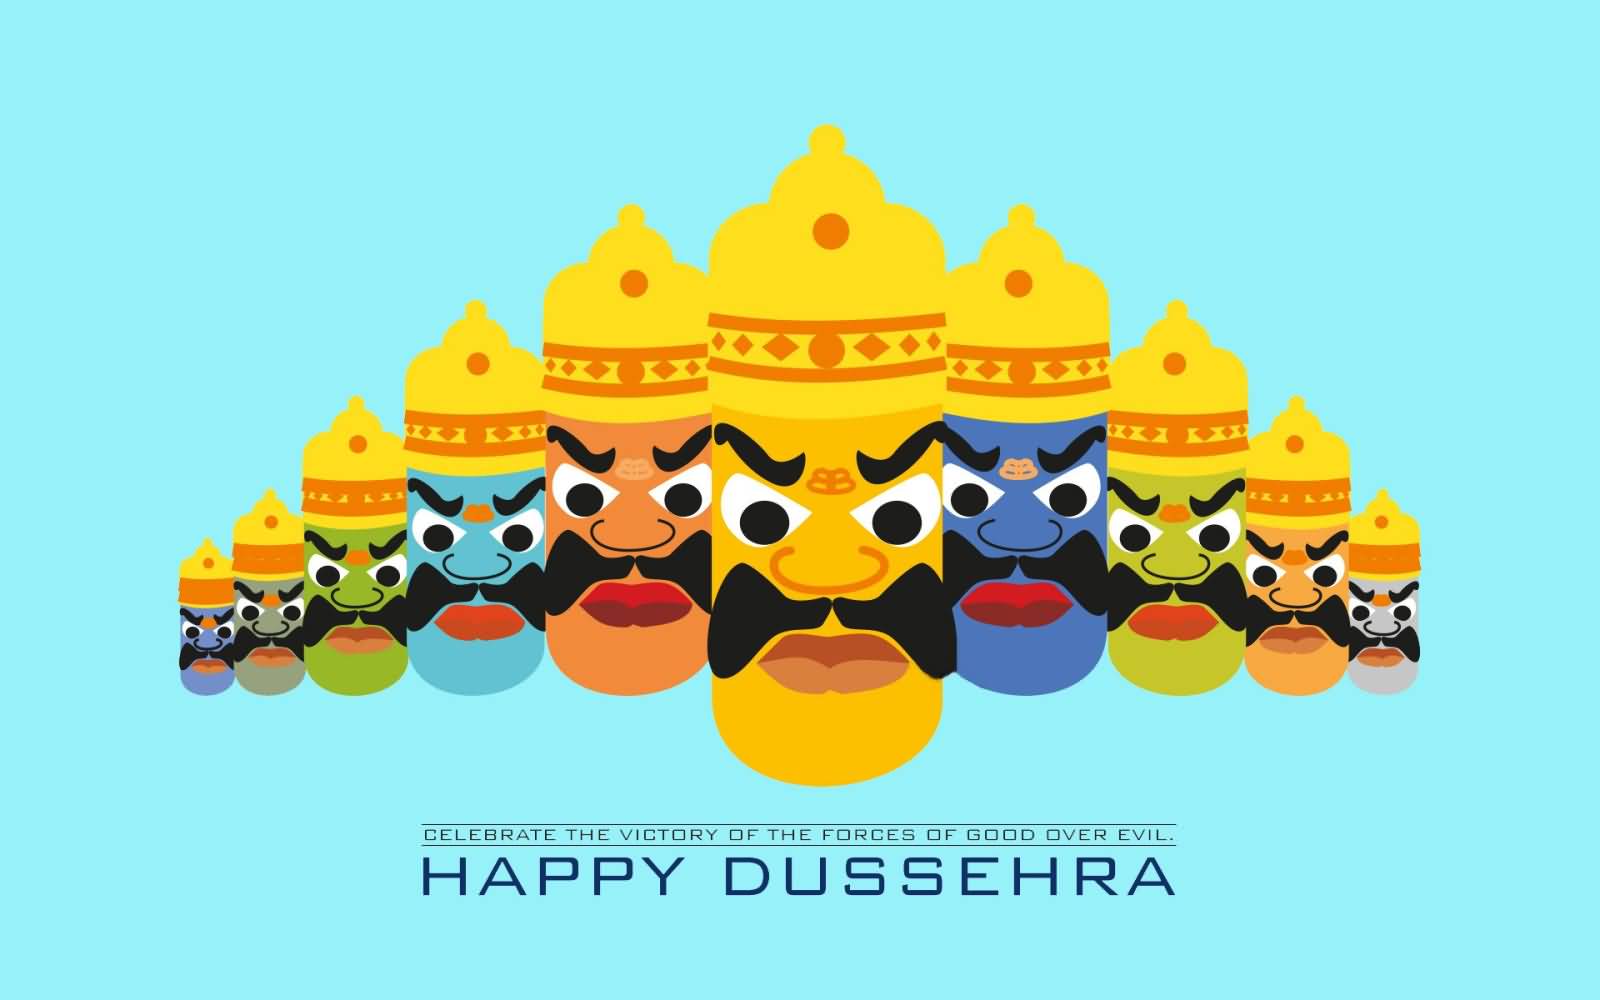 Celebrate The Victory Of The Forces Of Good Over Evil - Dussehra Images In Cartoon , HD Wallpaper & Backgrounds